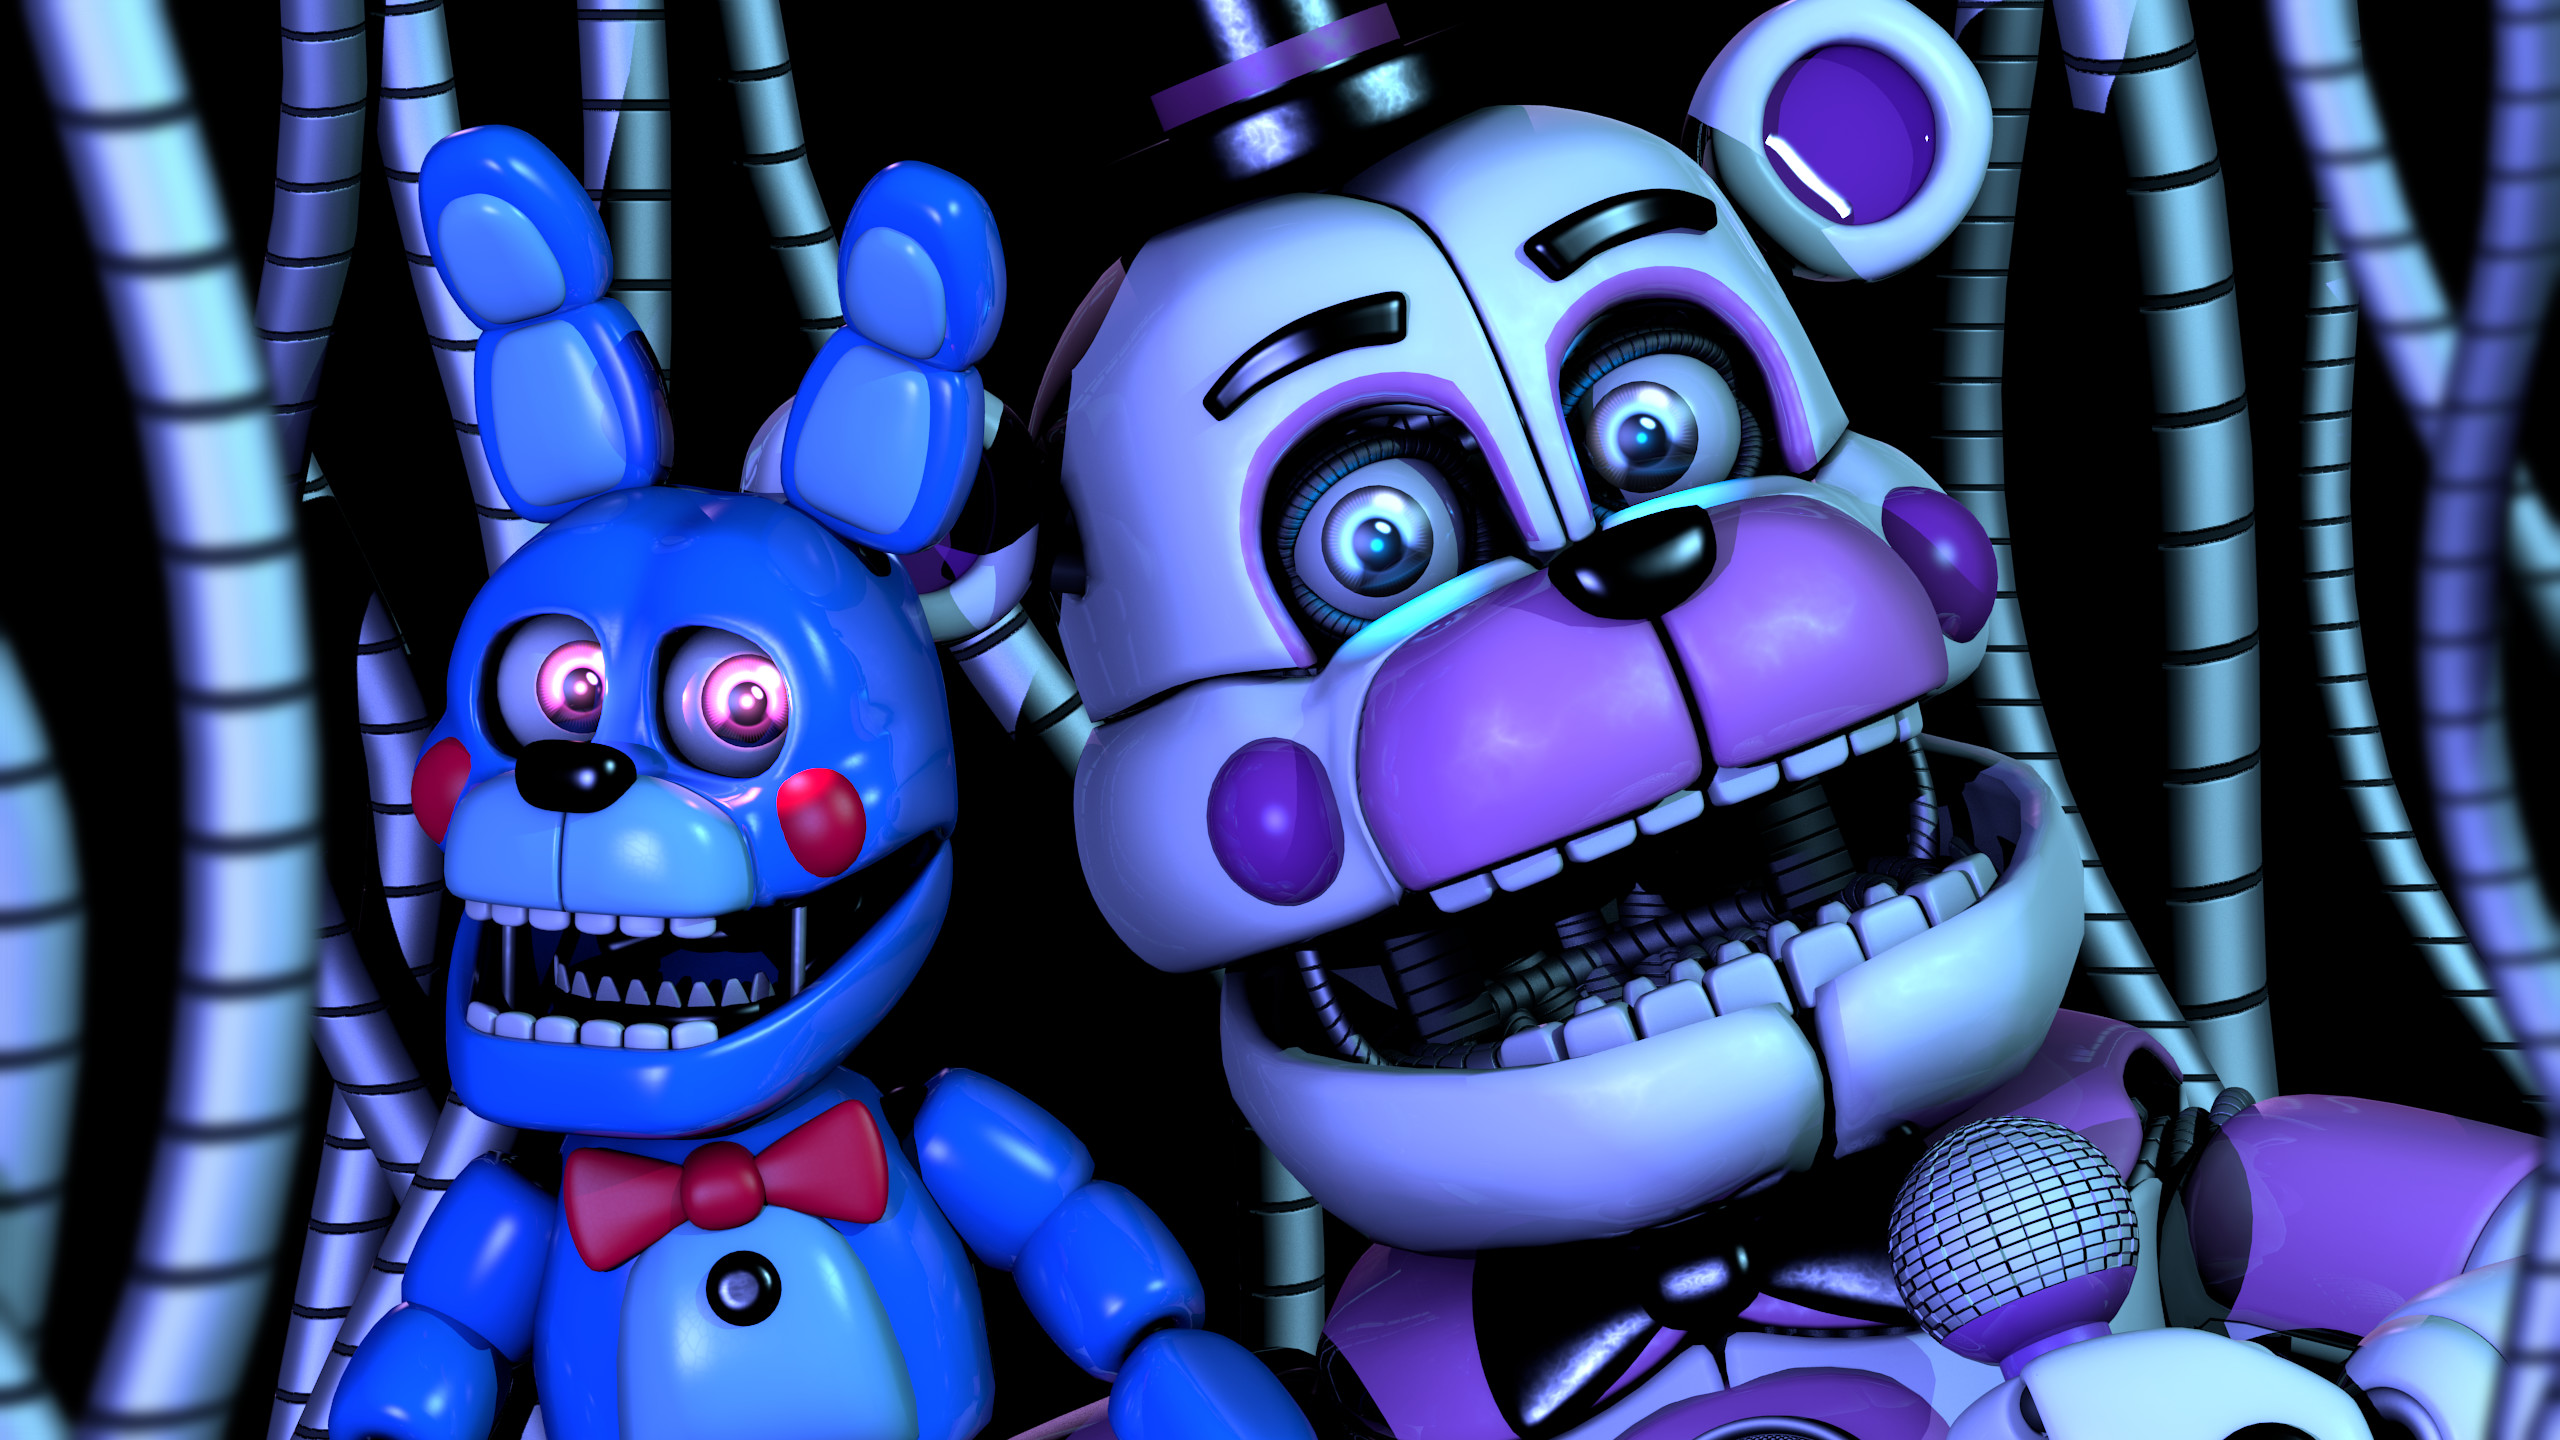 Five Nights at Freddys Wallpapers (80+ images)